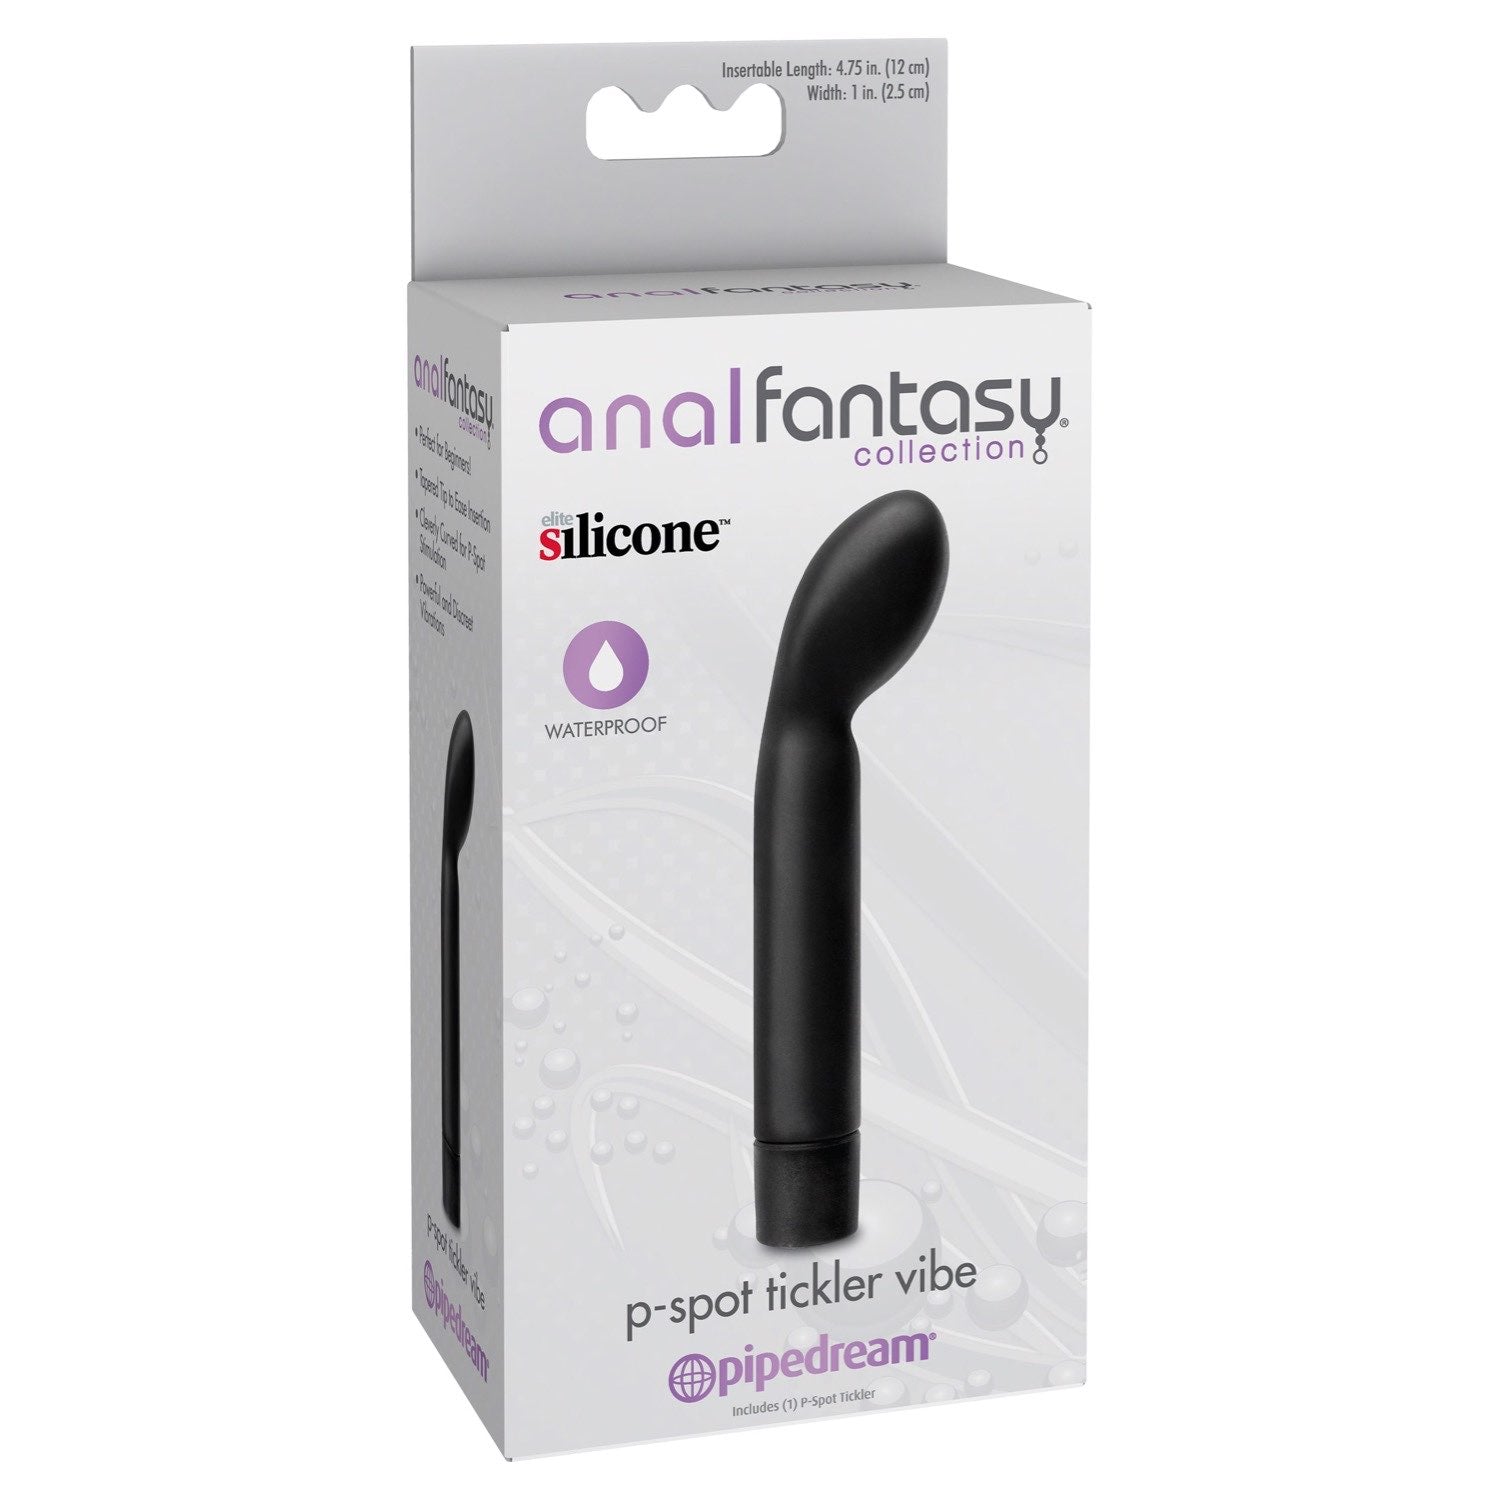 Anal Fantasy Collection P-spot Tickler Vibe - Black 12 cm (4.75&quot;) Prostate Vibrator by Pipedream